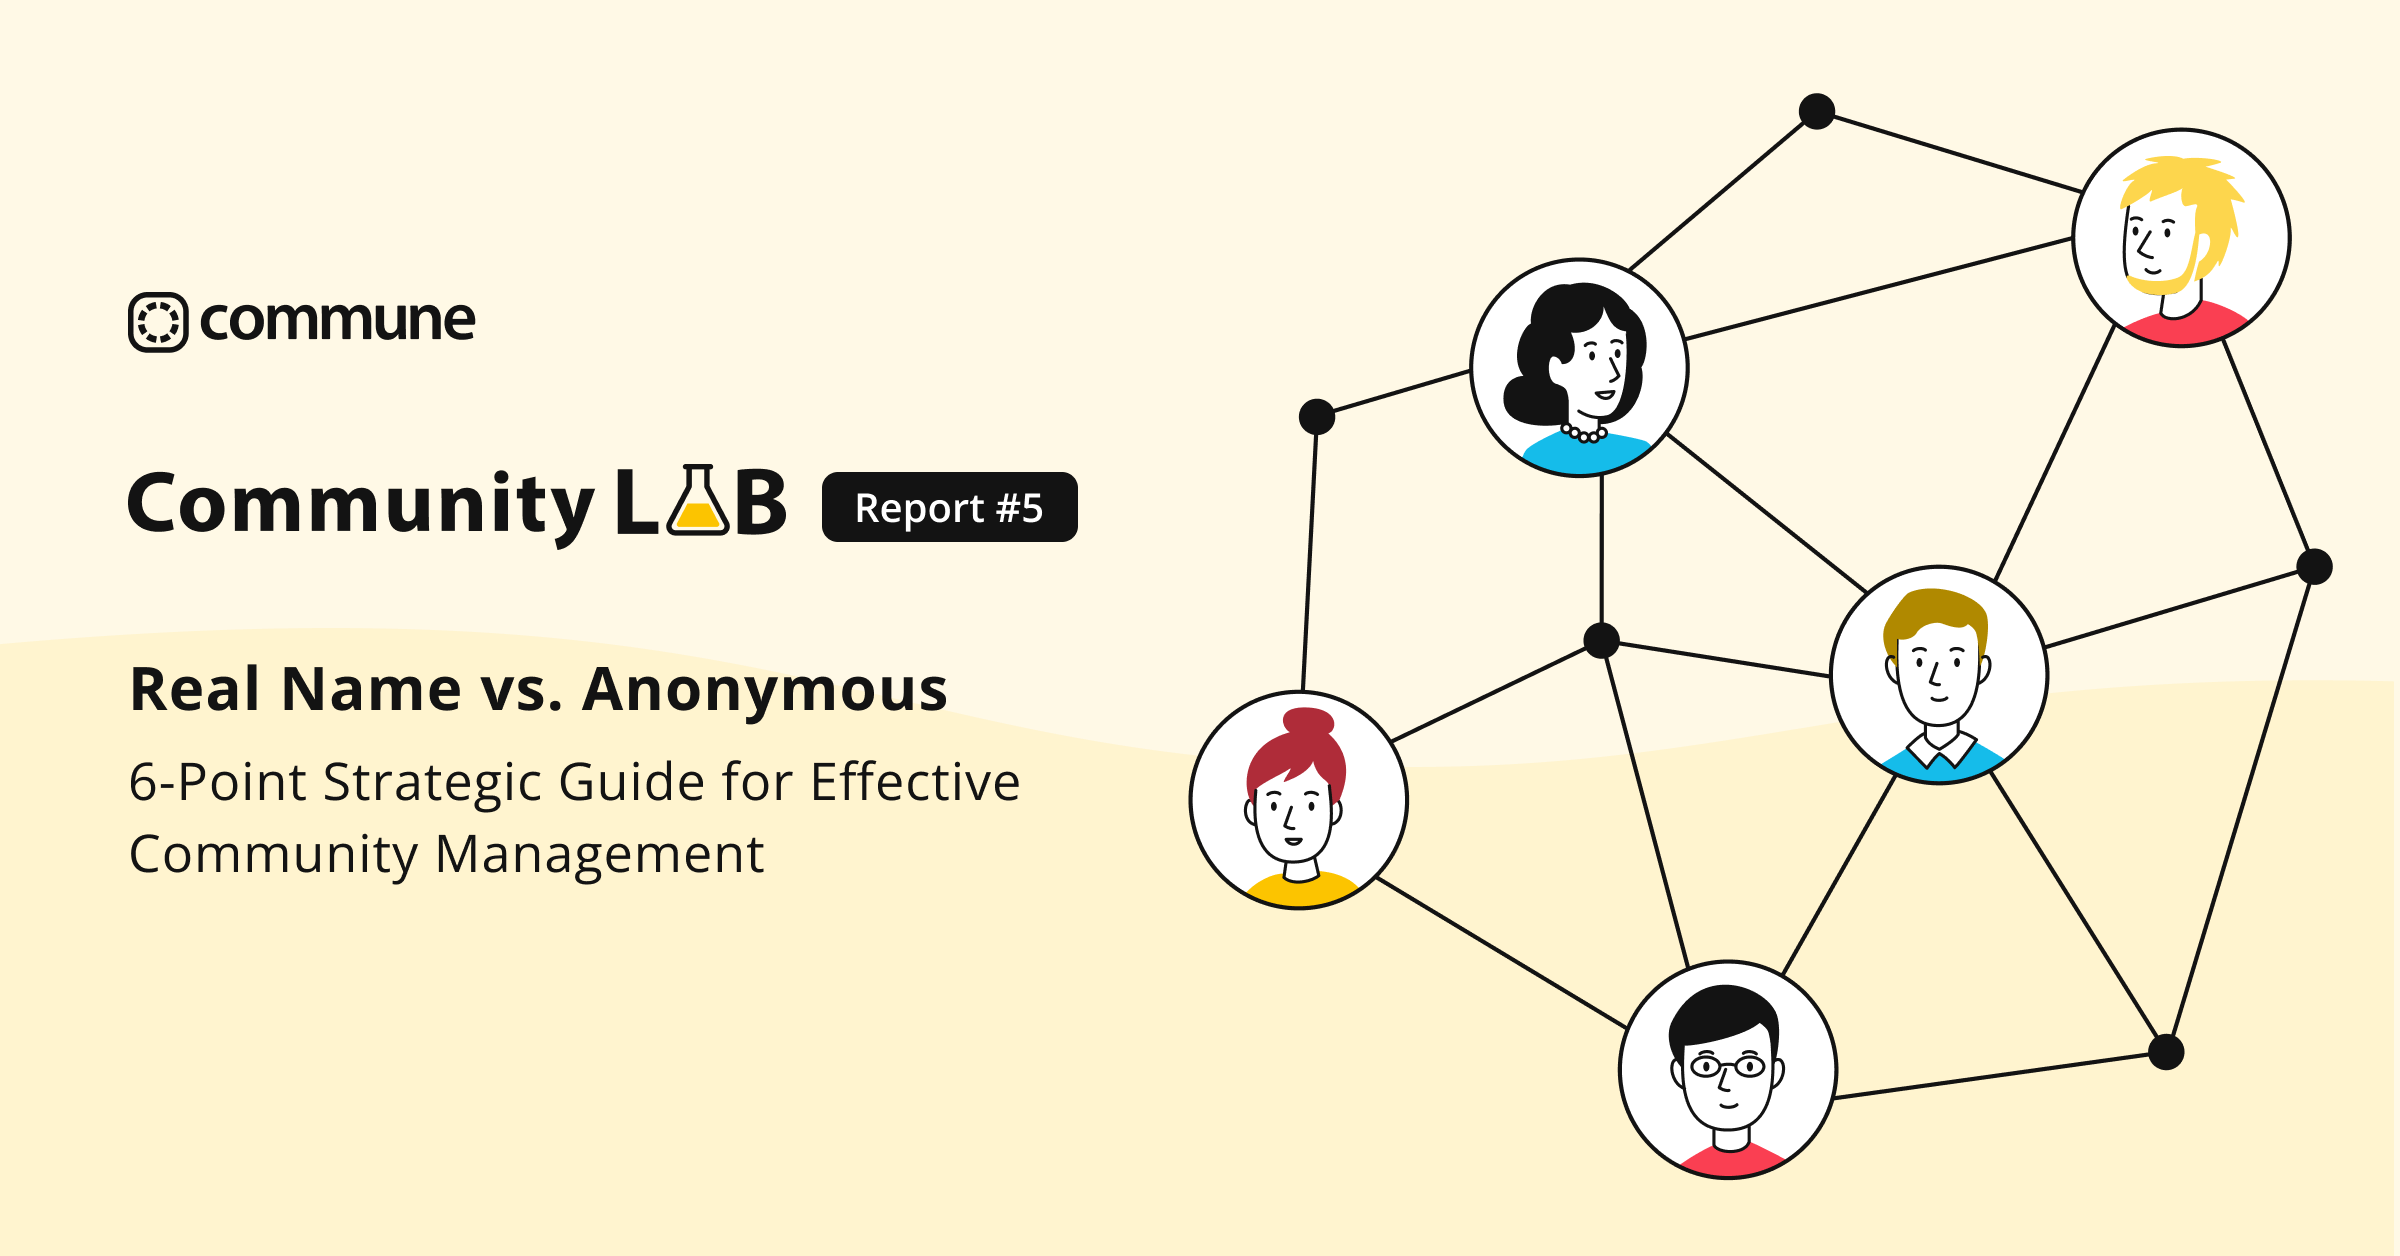 Real Name vs. Anonymous: 6-Point Strategic Guide for Effective Community Management